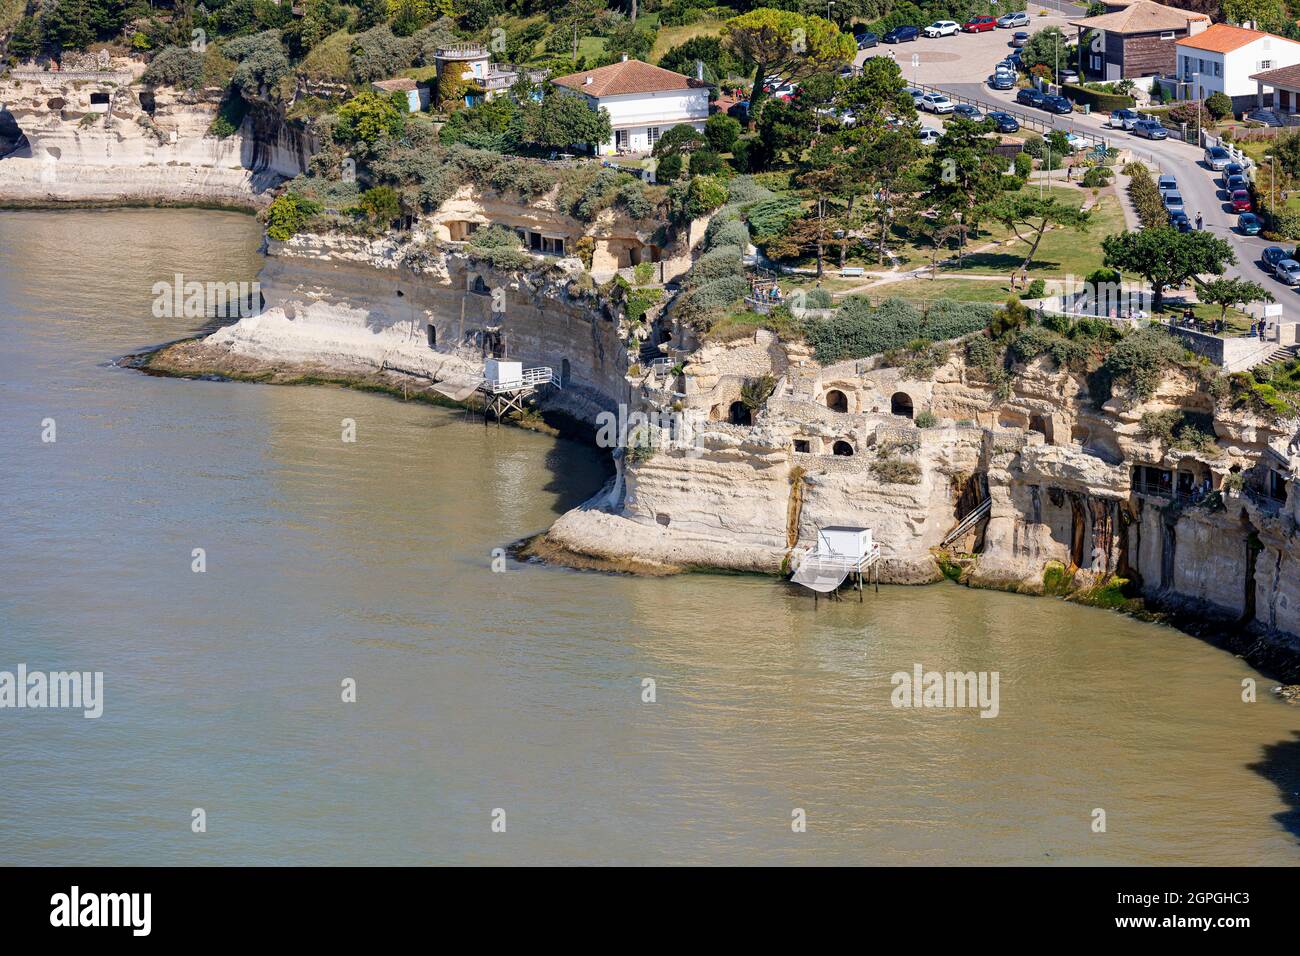 France, Charente Maritime, Meschers sur Gironde, troglodyte houses in the cliff (aerial view) Stock Photo